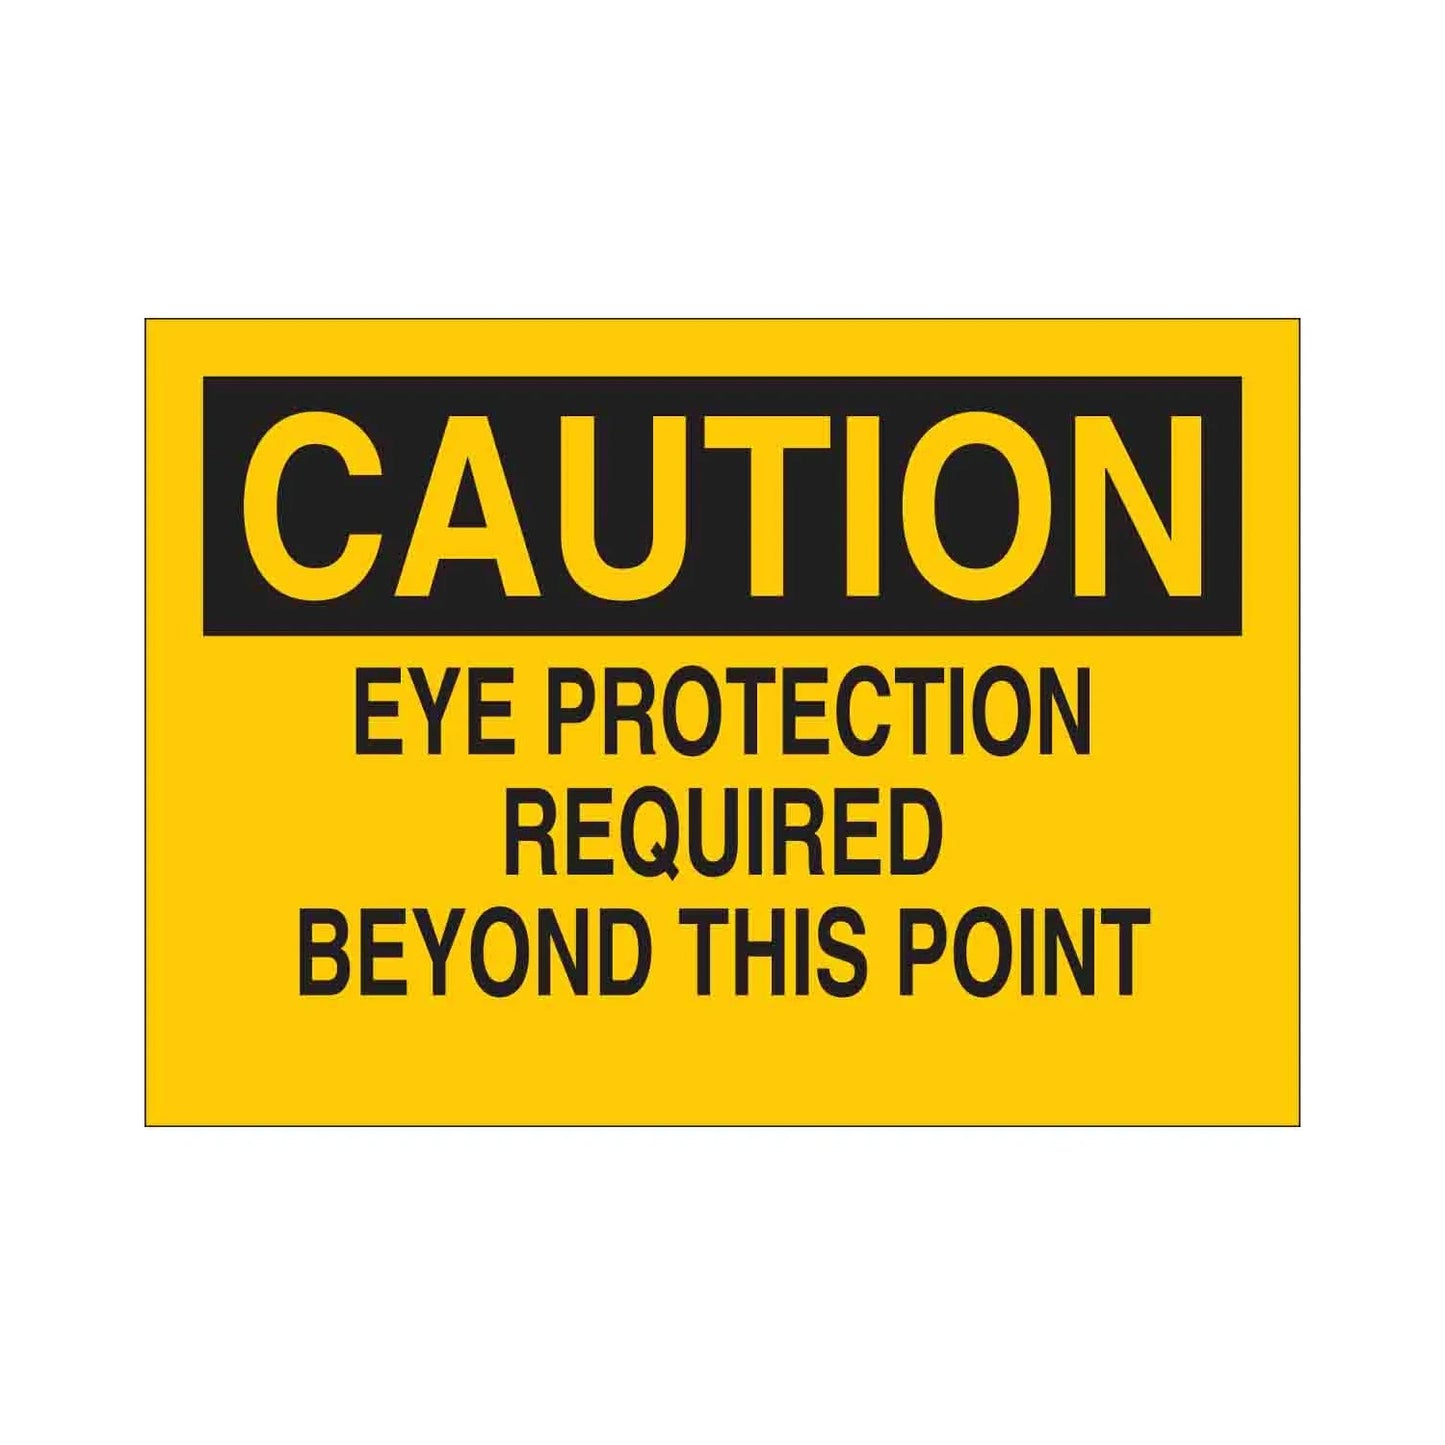 CAUTION Eye Protection Required Beyond This Point Sign